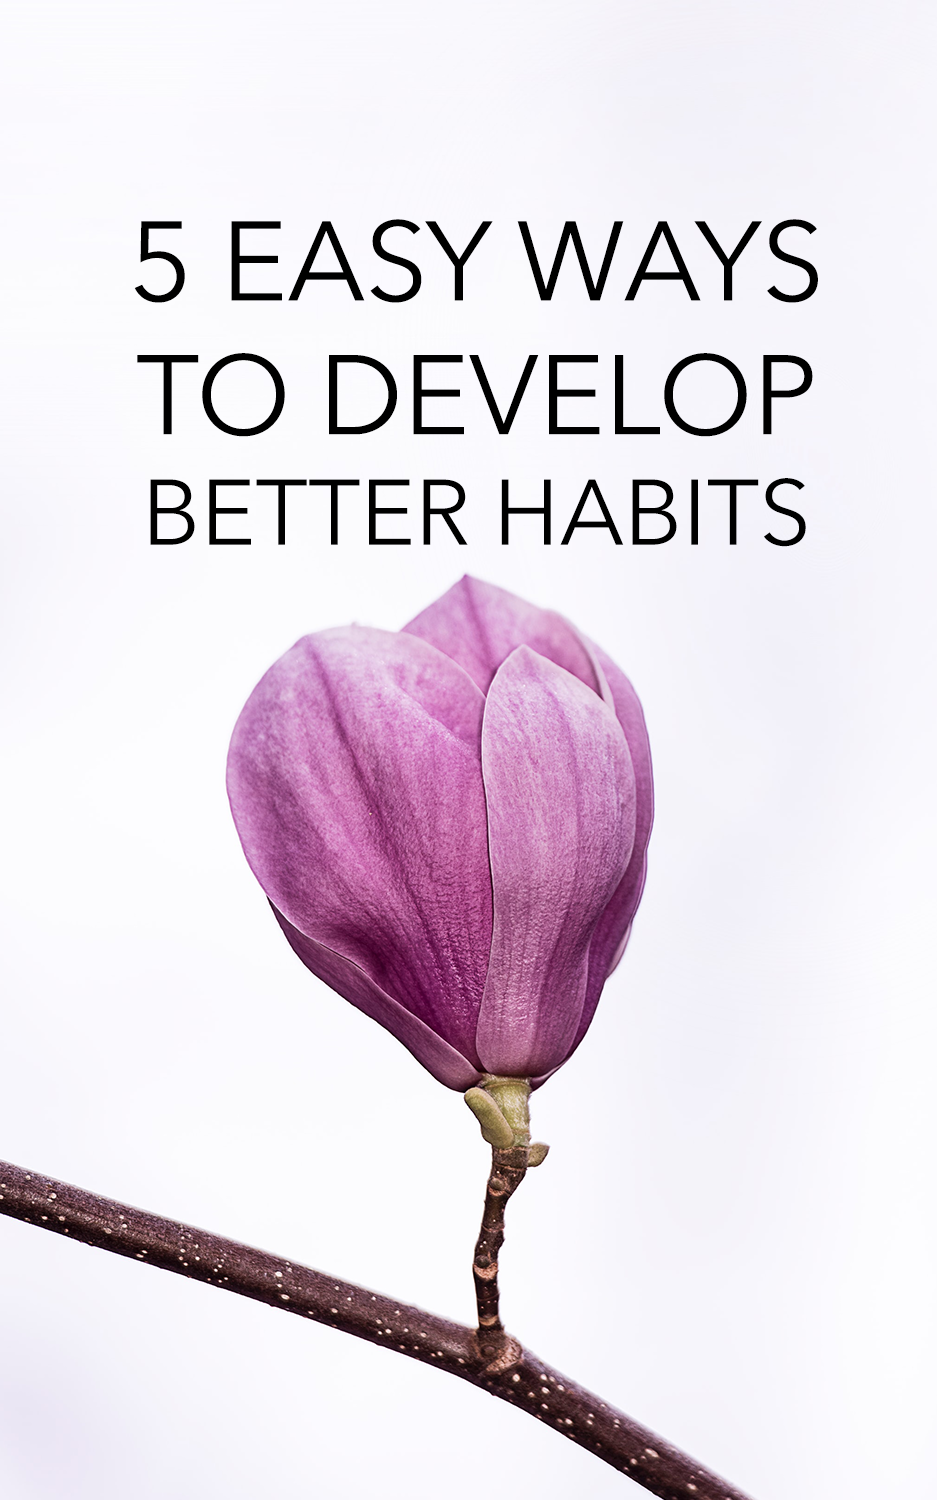 5 Easy Ways To Develop Better Habits